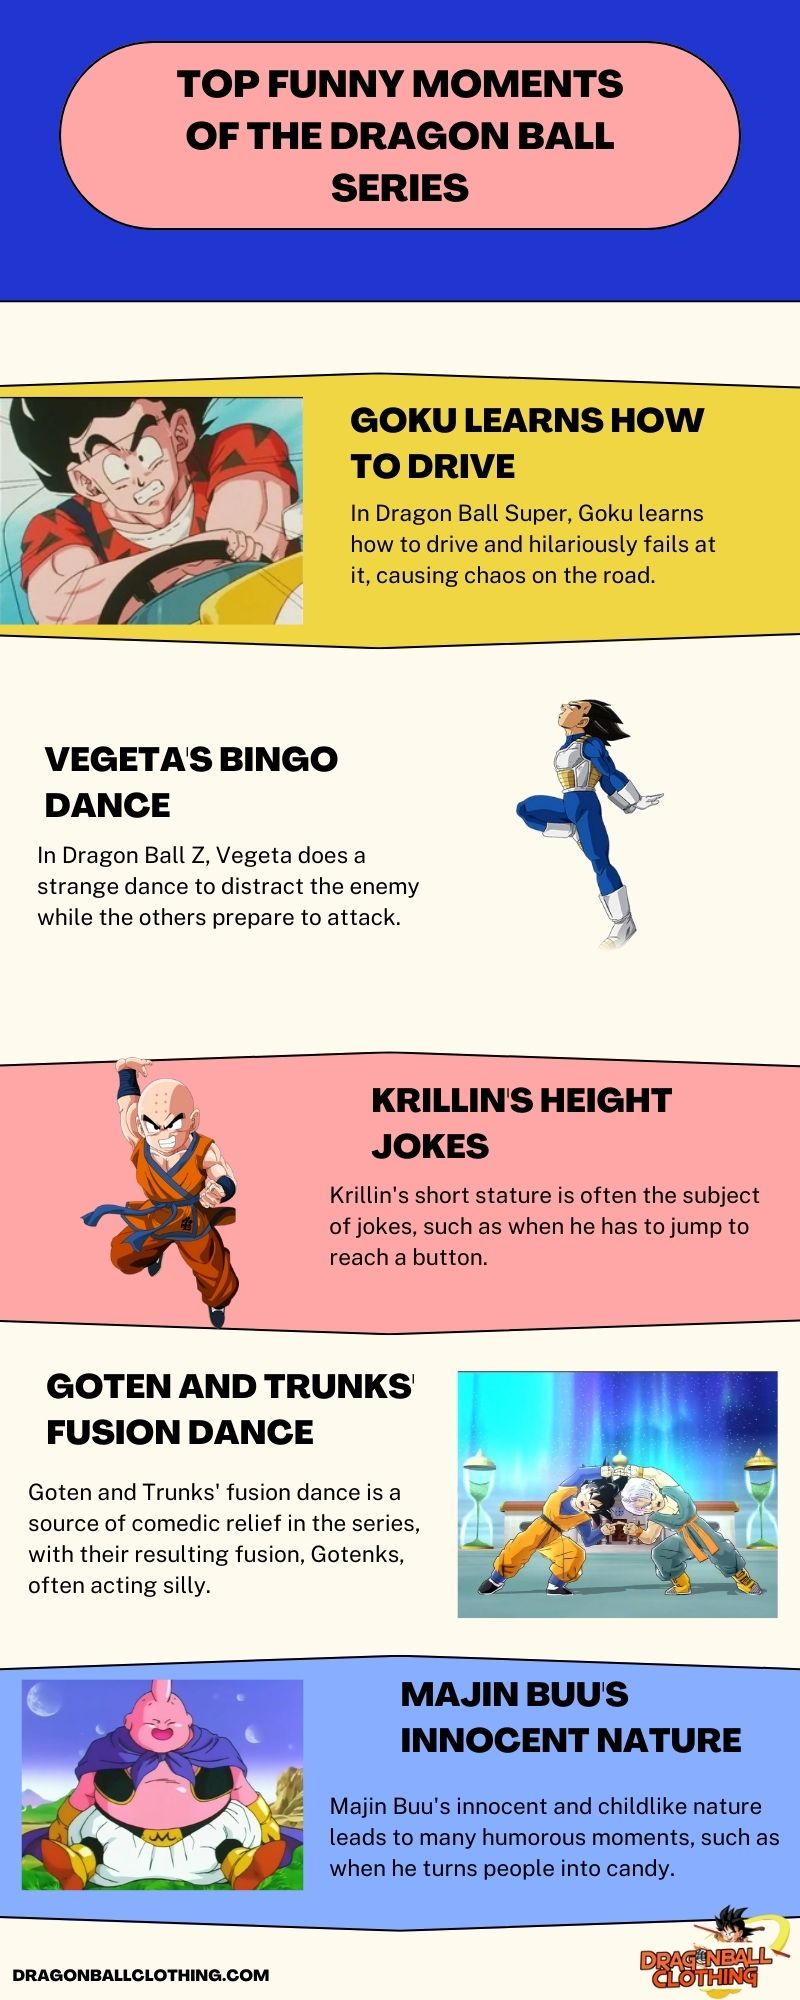 TOP FUNNY MOMENTS OF THE DRAGON BALL SERIES infographic